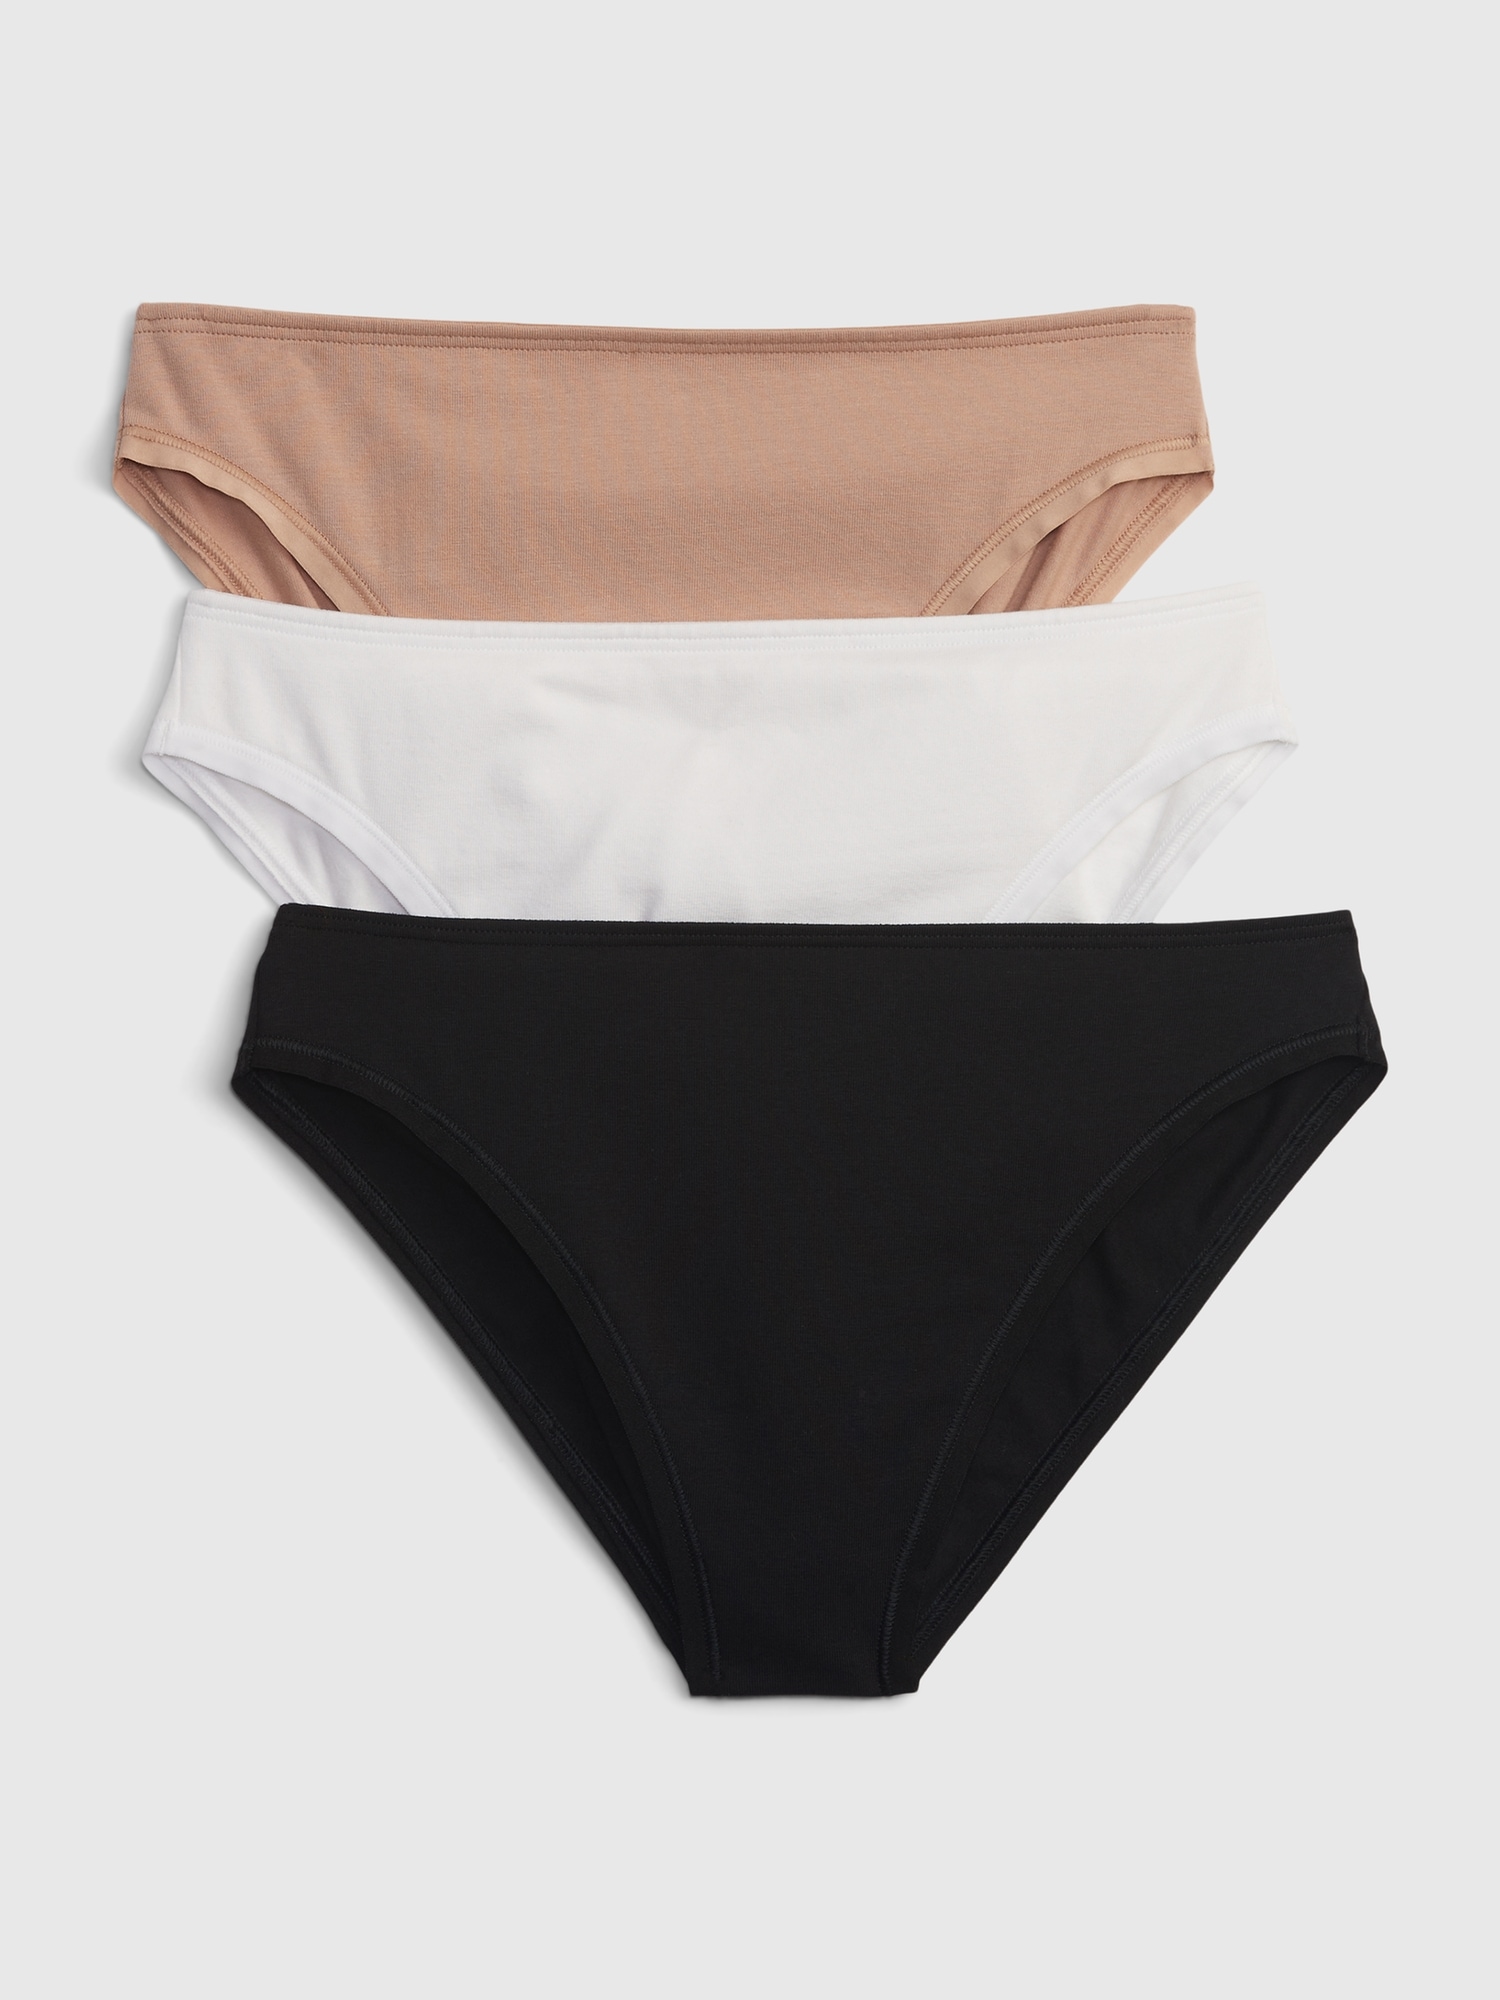 2 pack of midi knickers in beige - Organic Cotton